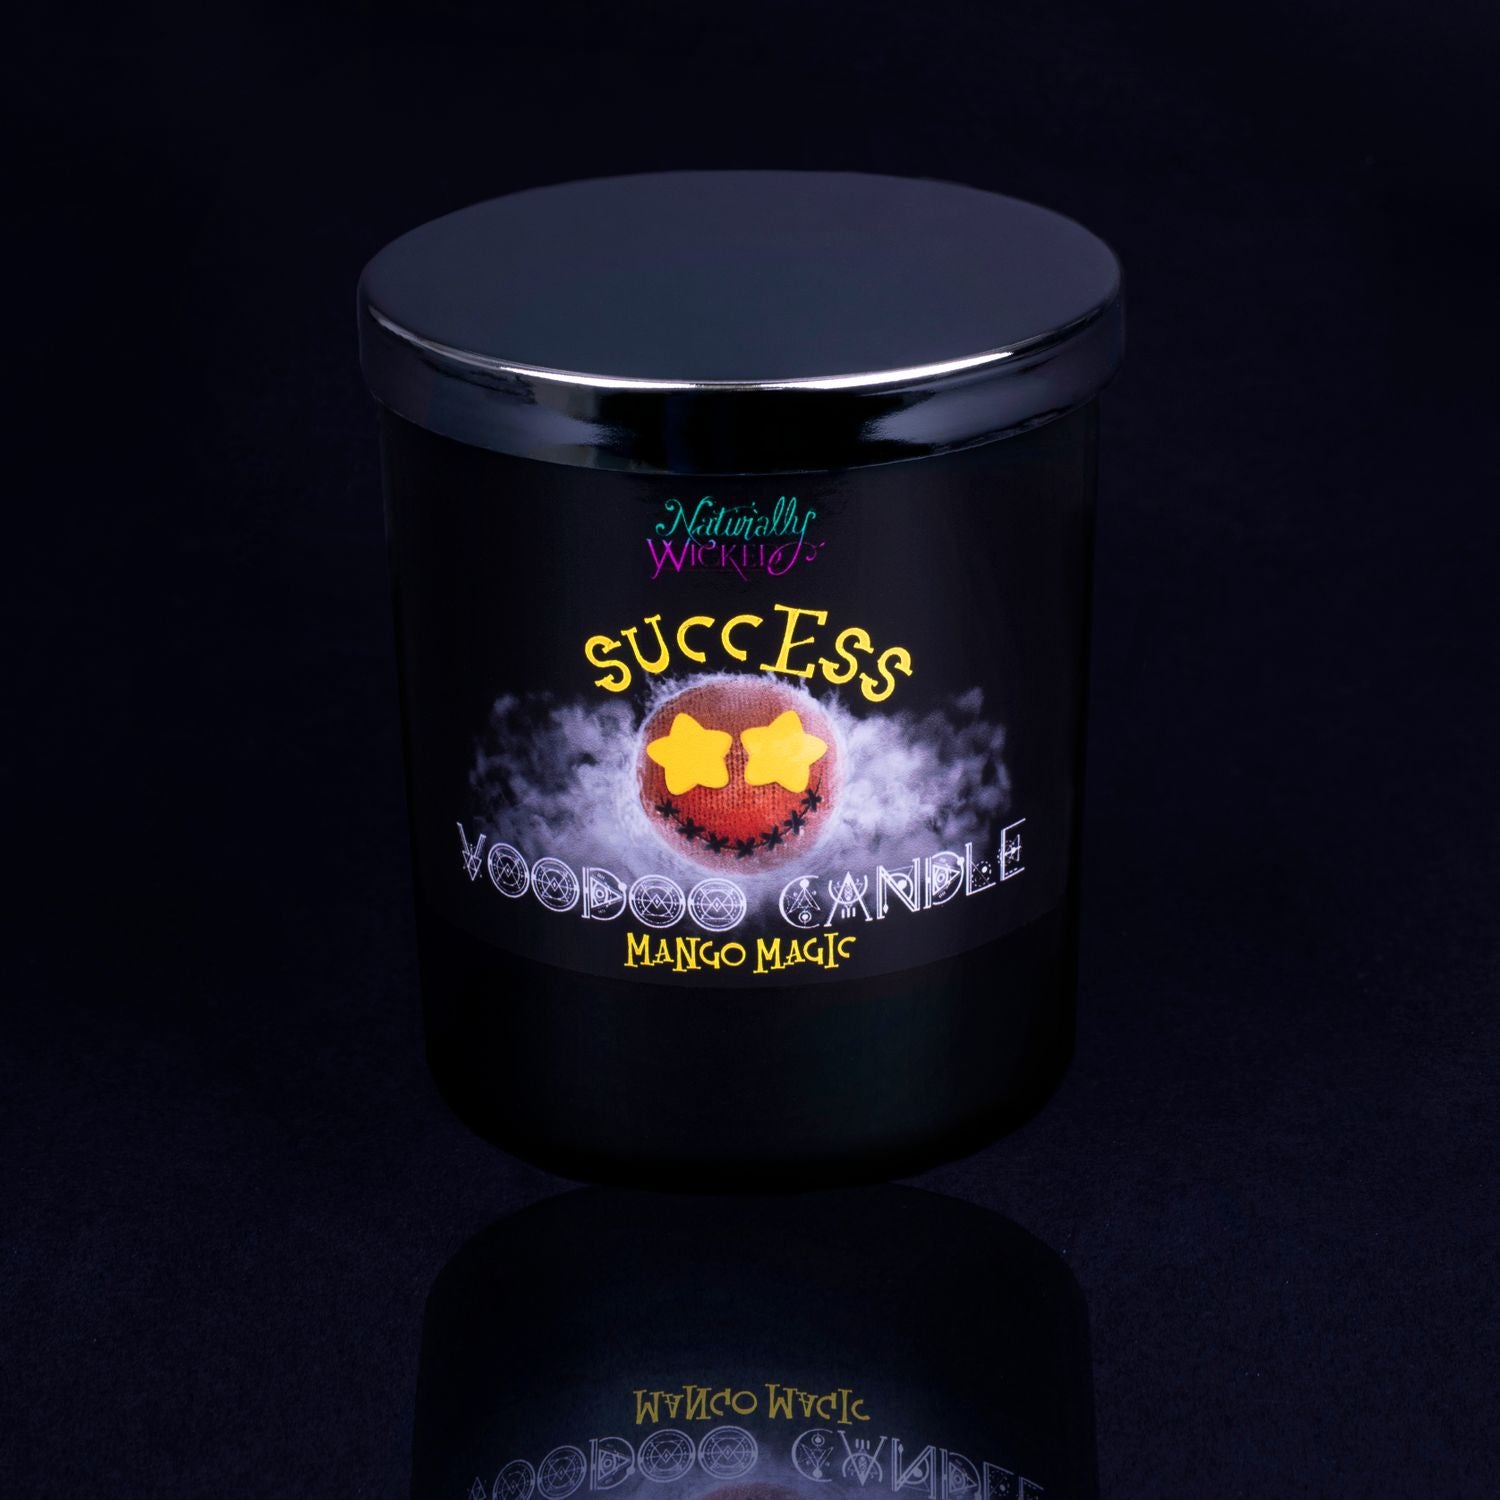 Naturally Wicked Voodoo Success Spell Candle With Mirror Finished Exquisite Lid In Place. Featuring A Black Gloss Label, A Voodoo Doll Design And Mango Magic Scent.